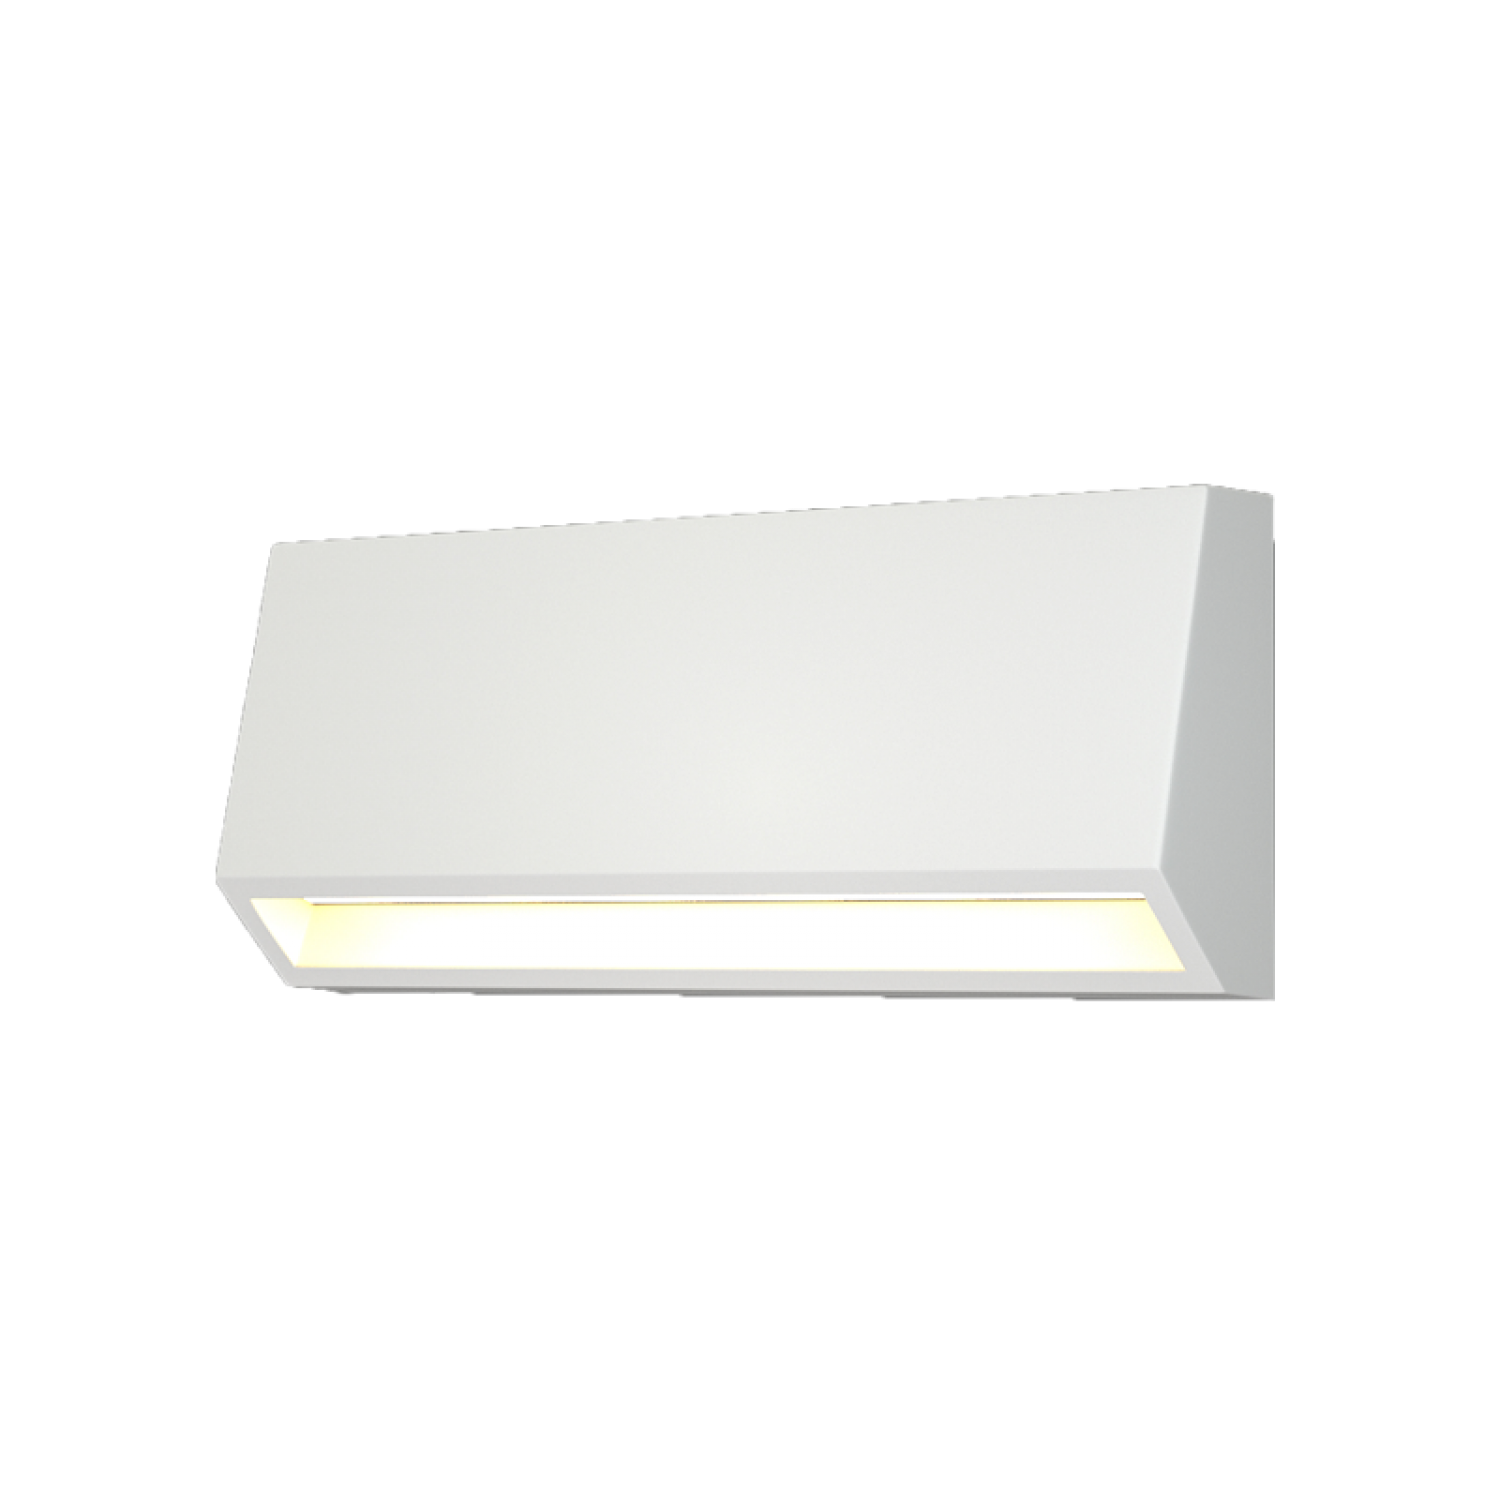 Blue LED 3W 3CCT Outdoor Wall Lamp White D:16cmx7cm (80202220)